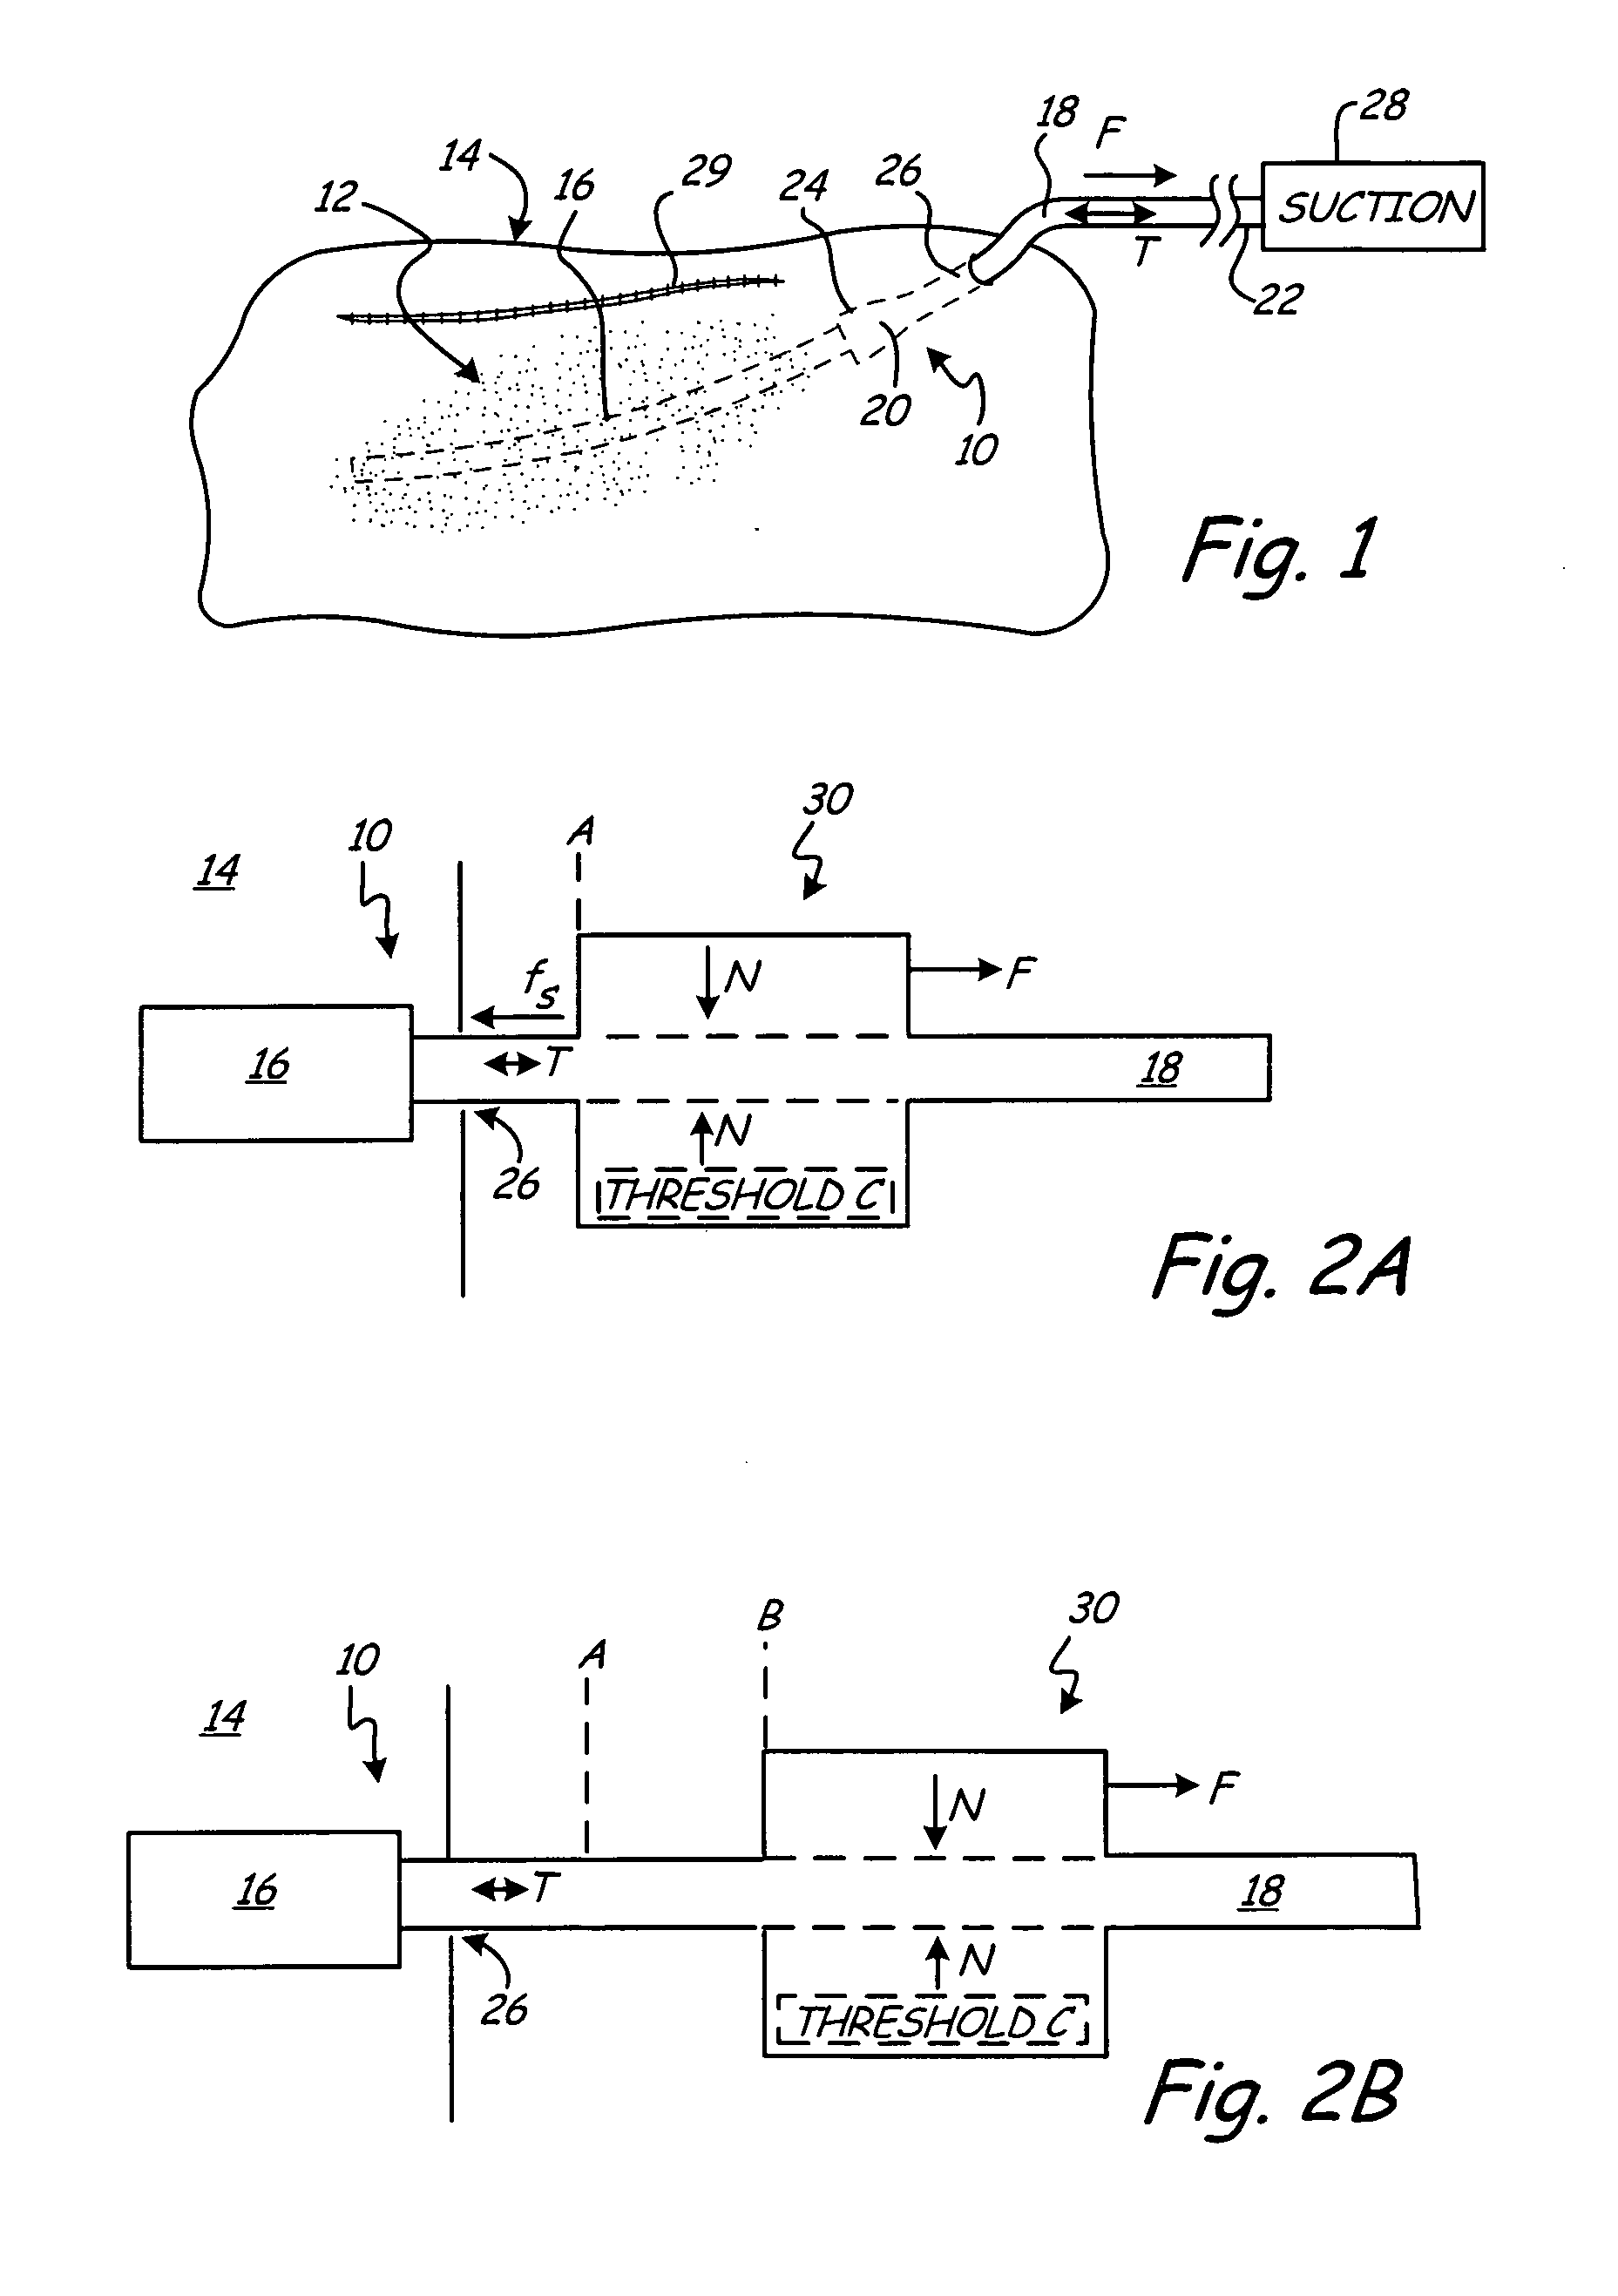 Wound drain removal device